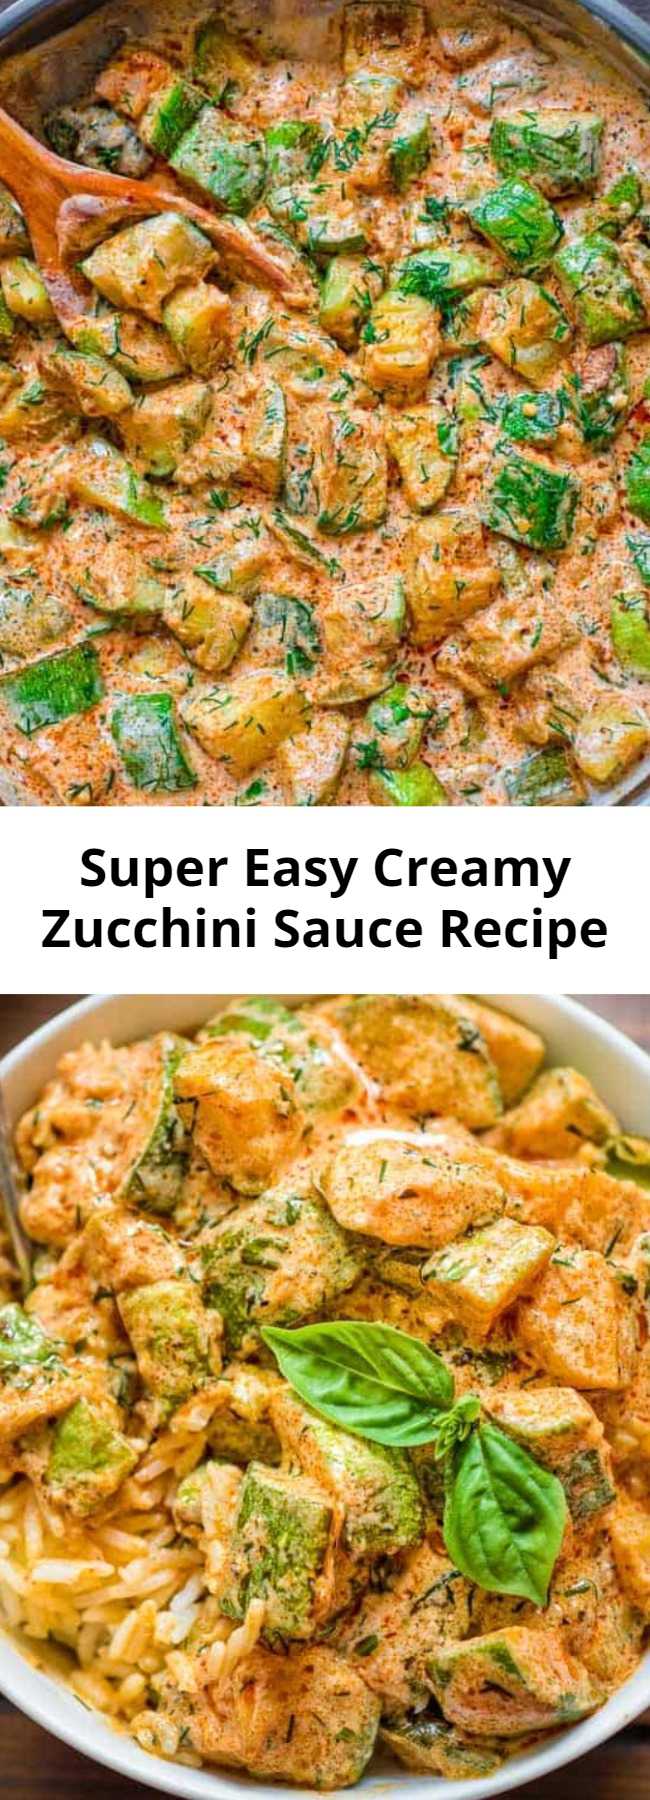 Super Easy Creamy Zucchini Sauce Recipe - This Creamy Zucchini Sauce is bursting with flavor! Made with paprika-roasted zucchinis, sour cream, garlic, and fresh herbs, it tastes great with pasta, over rice, or just with a slice of bread. #zucchini #dinner #lunch #whole30 #keto #ketosis #ketorecipe #vegetarian #mealprep #healthyrecipe